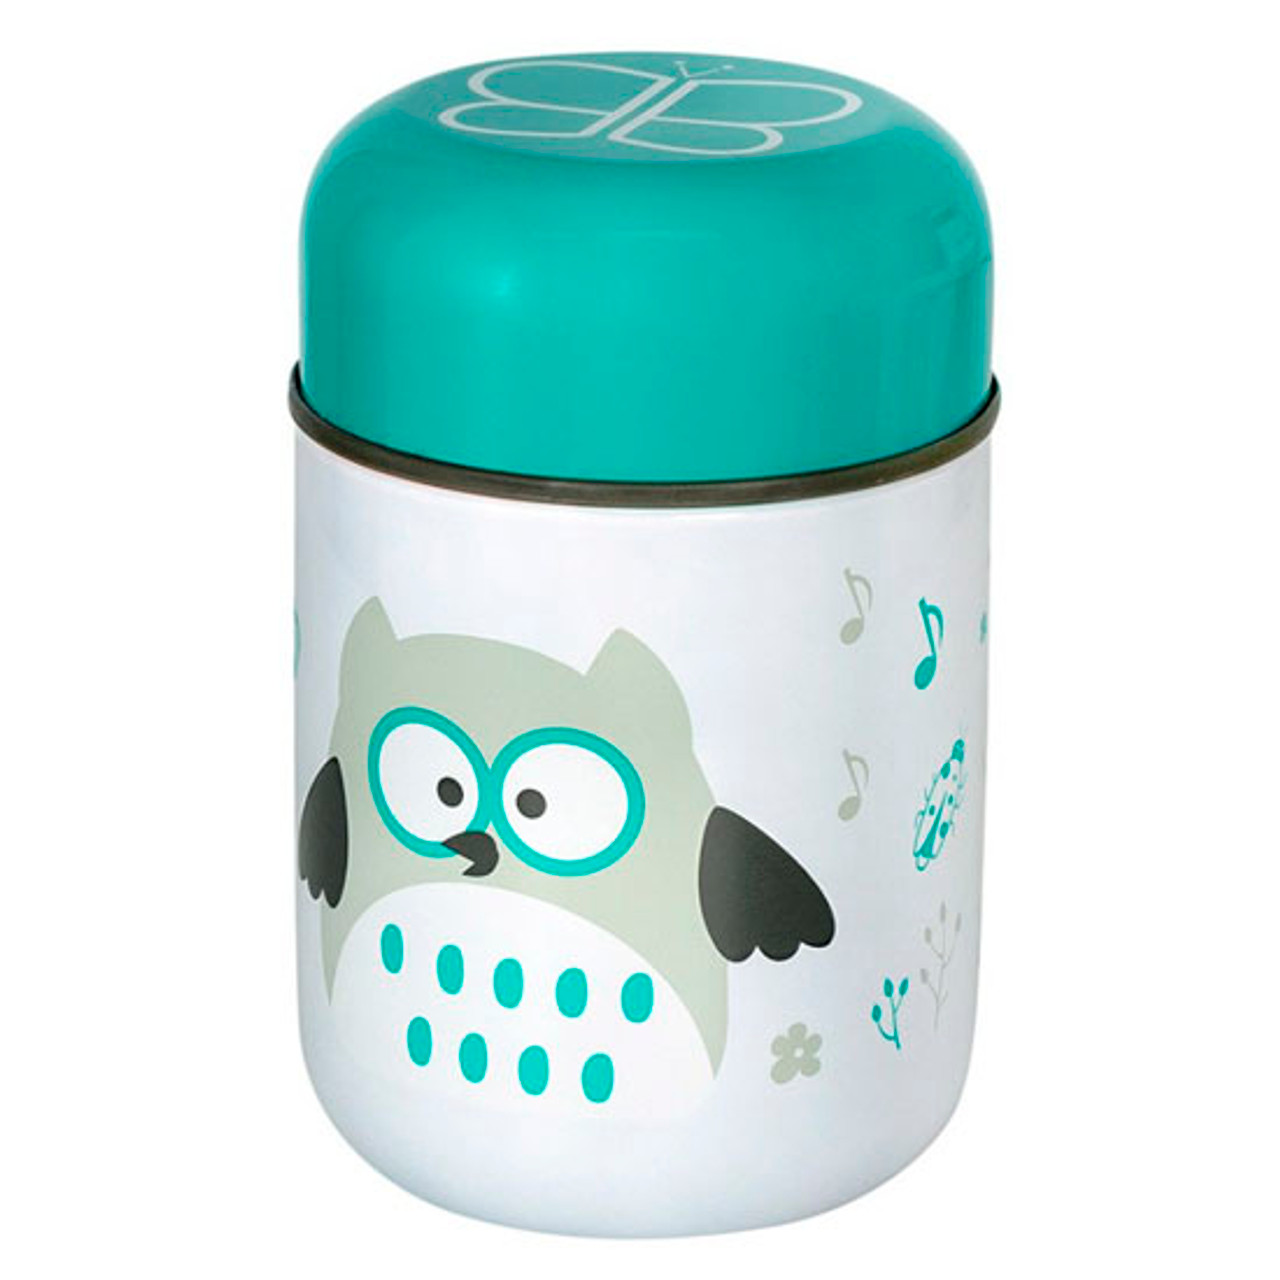 BBLuv Food Thermal Food Container with Spoon 10oz - Aqua